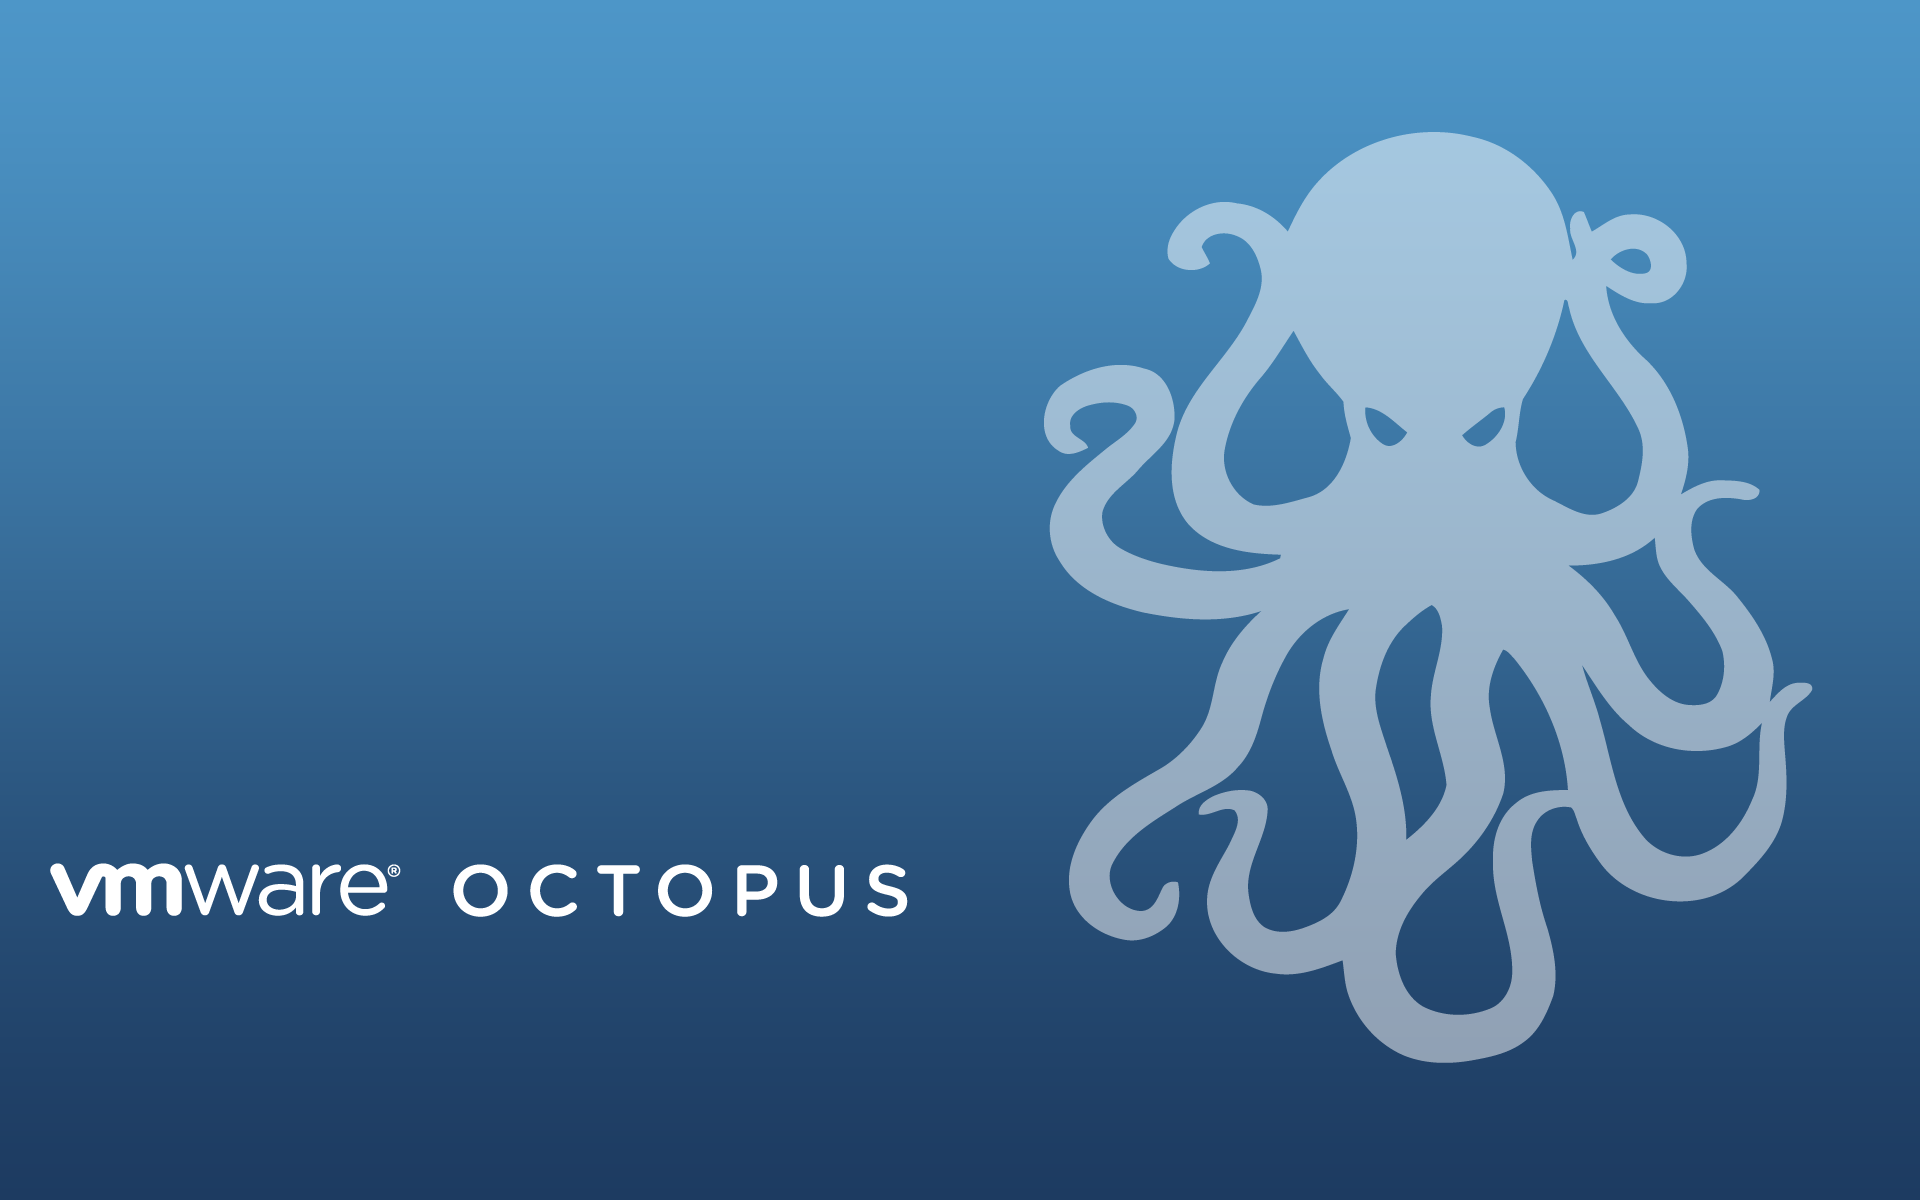 Octopus Wallpaper Of The Vmware I Have This One Is My